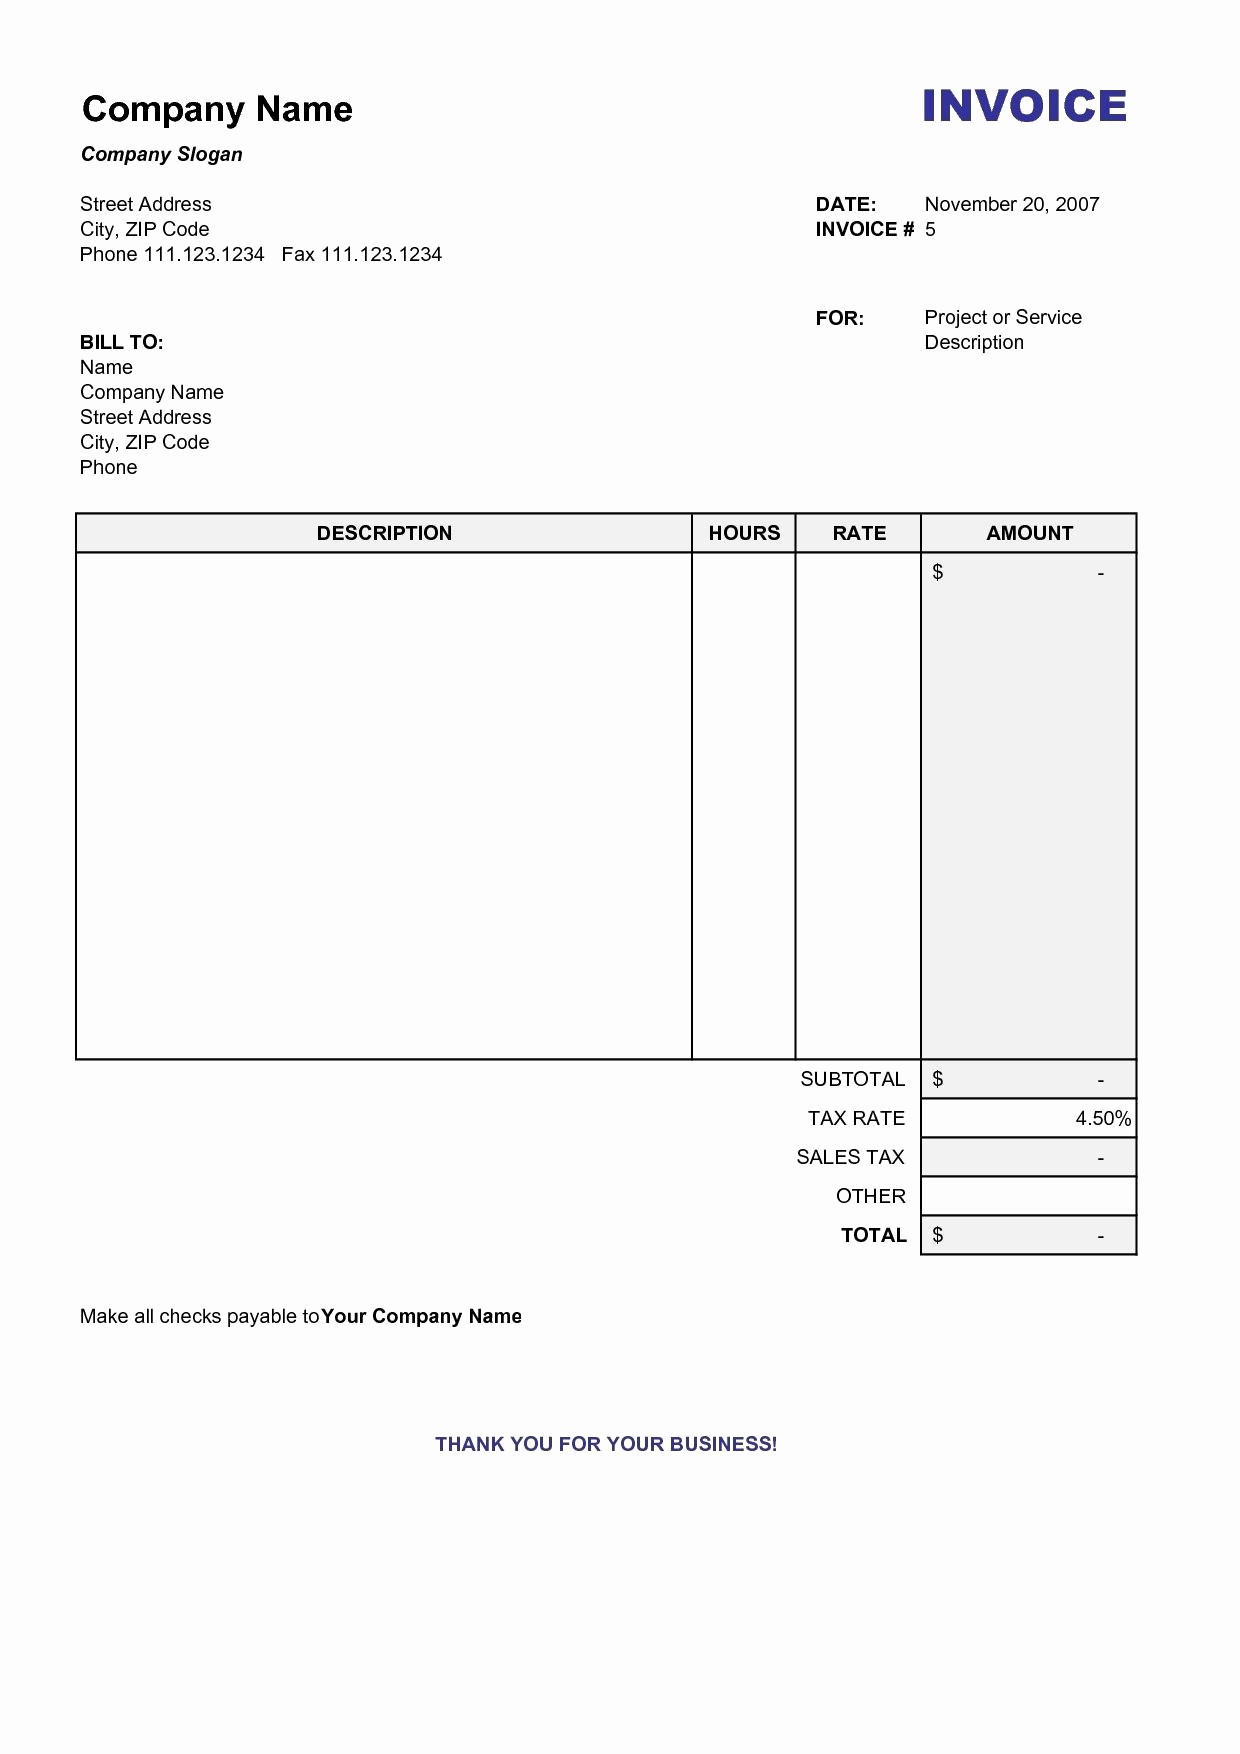 Copies Of Invoices for Free Beautiful Copy Of A Blank Invoice Invoice Template Free 2016 Copy Of